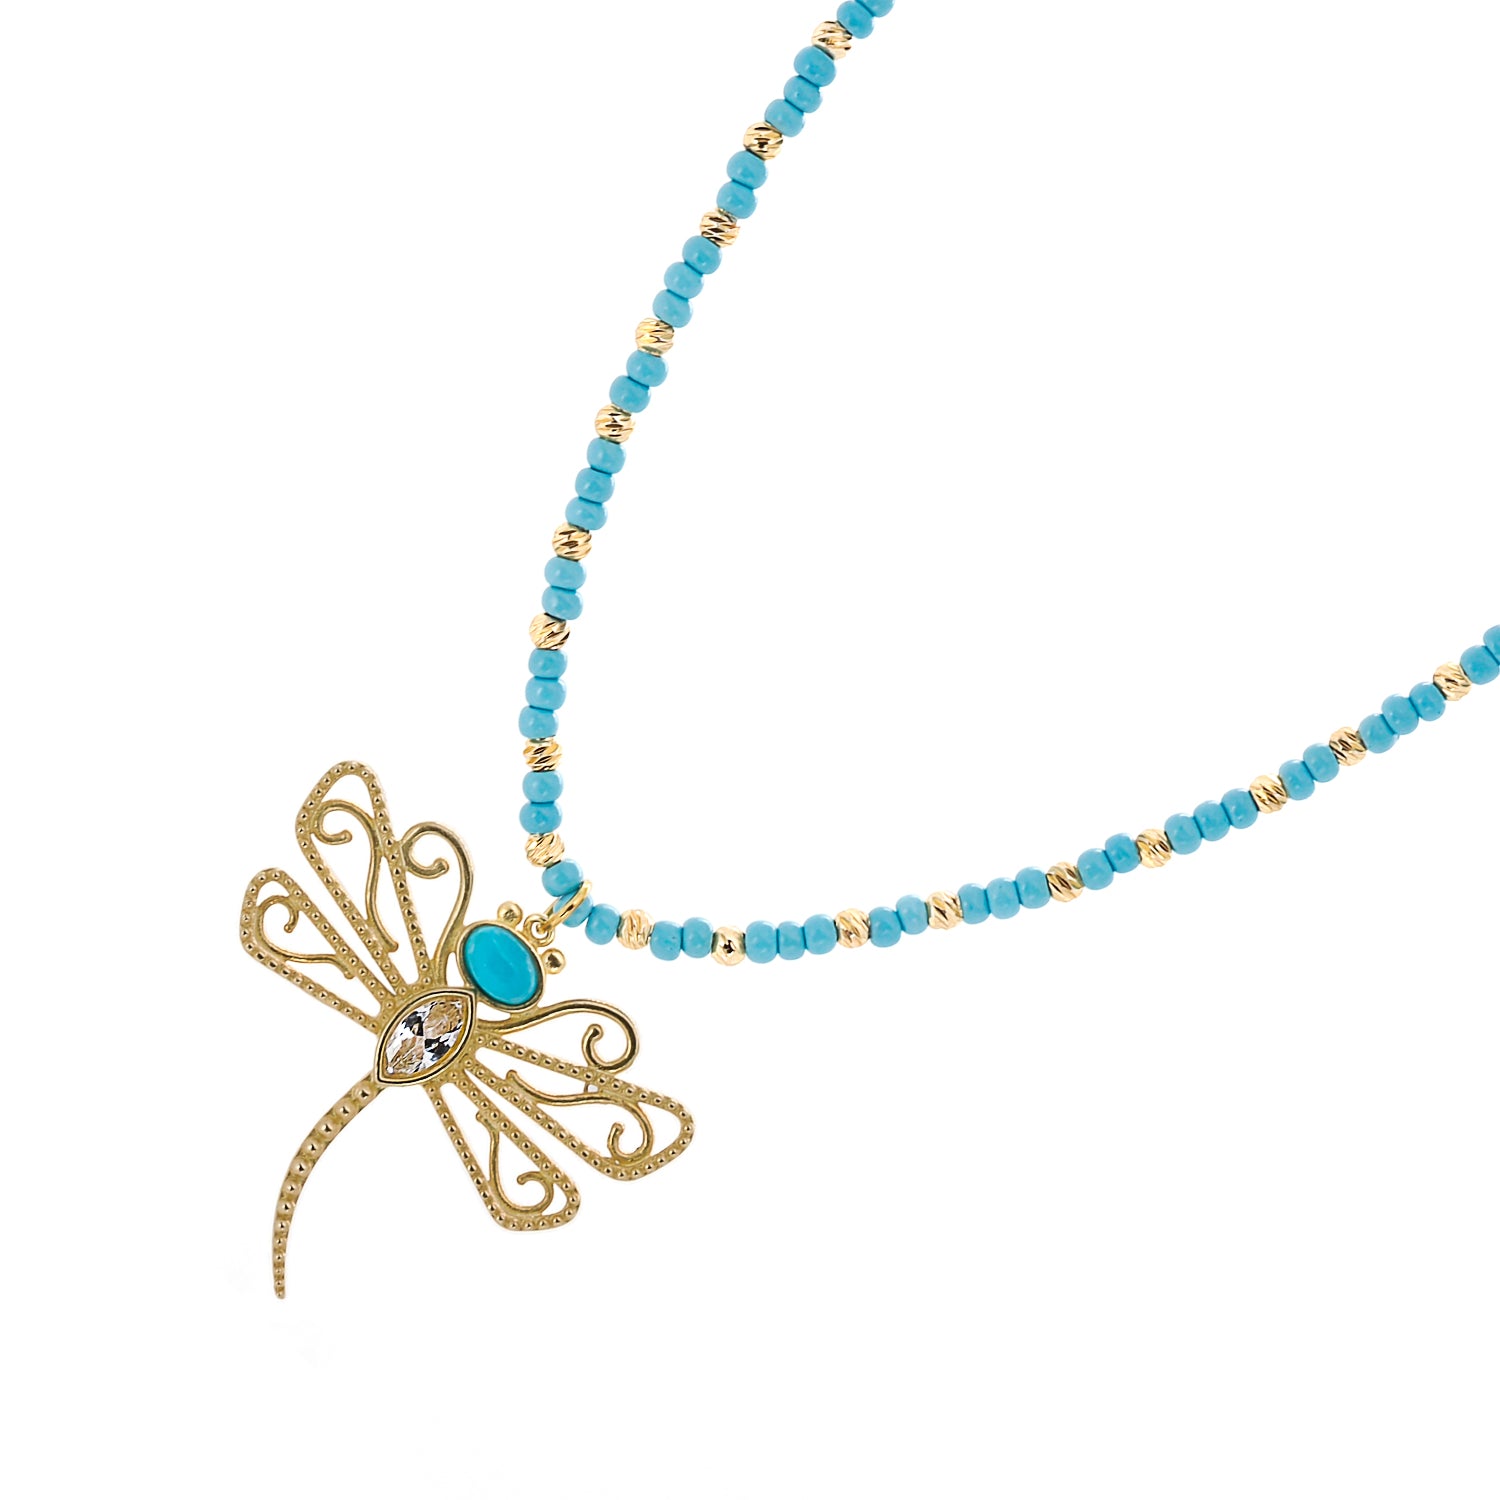 Spiritual Transformation - Gold-Plated Dragonfly Pendant.